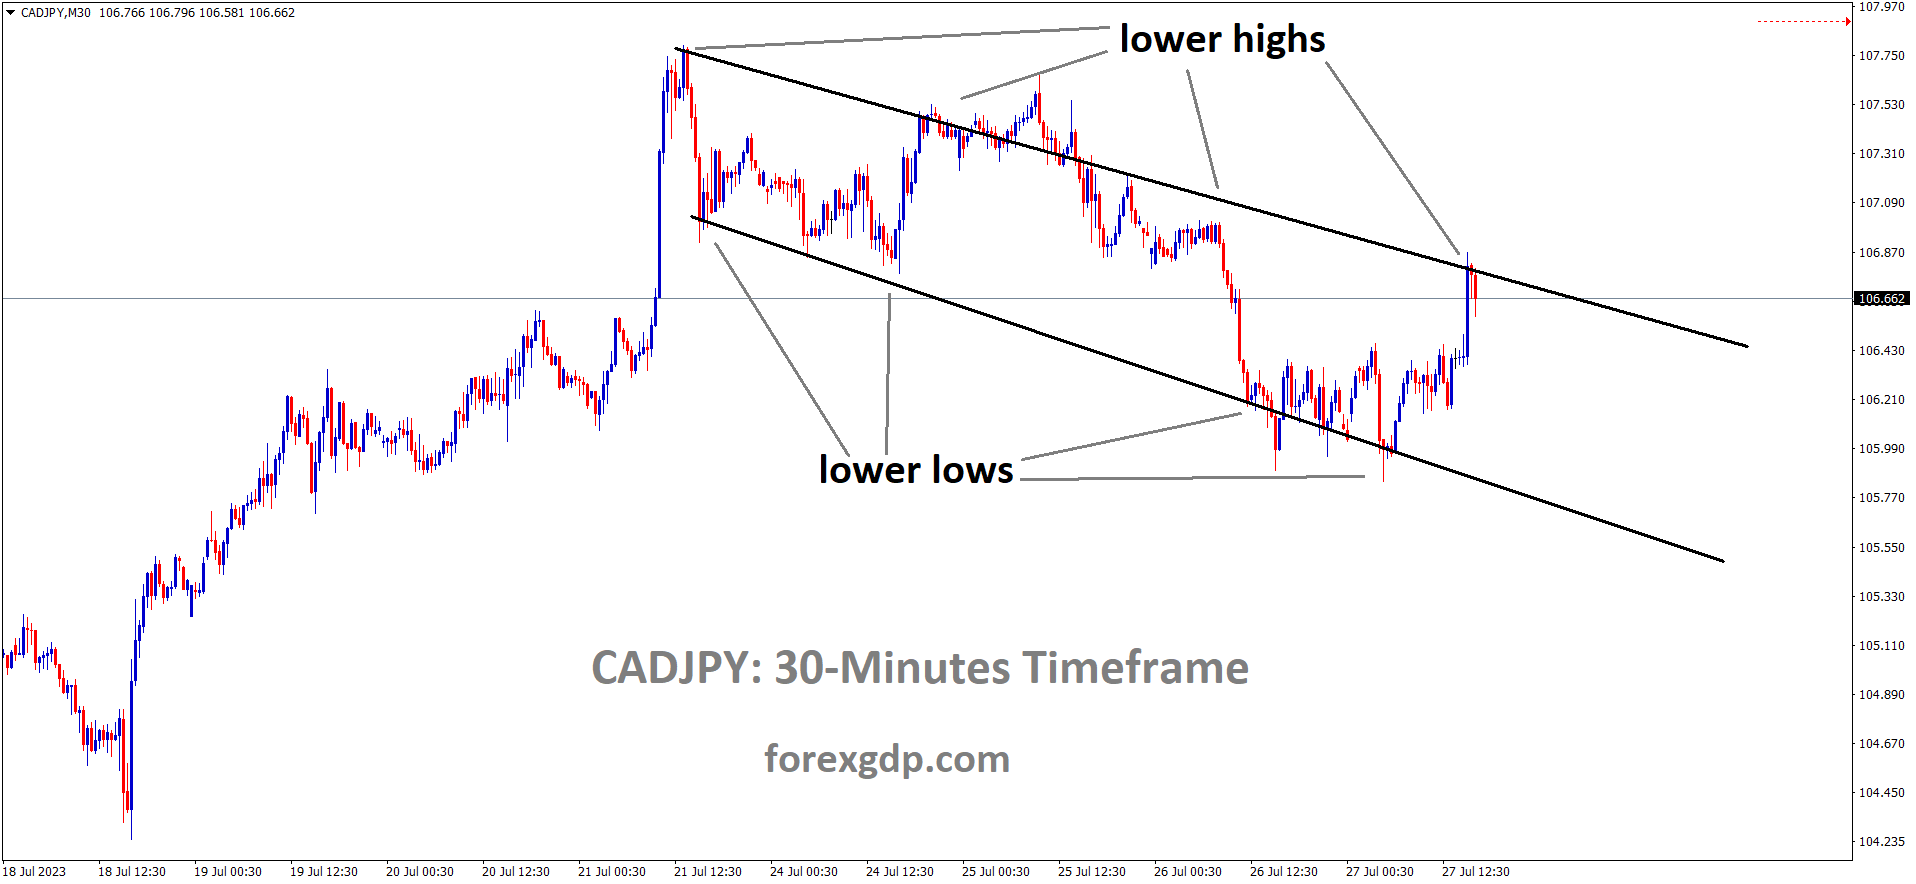 CADJPY M30 TF analysis Market is moving in the Descending channel and the market has reached the lower high area of the channel